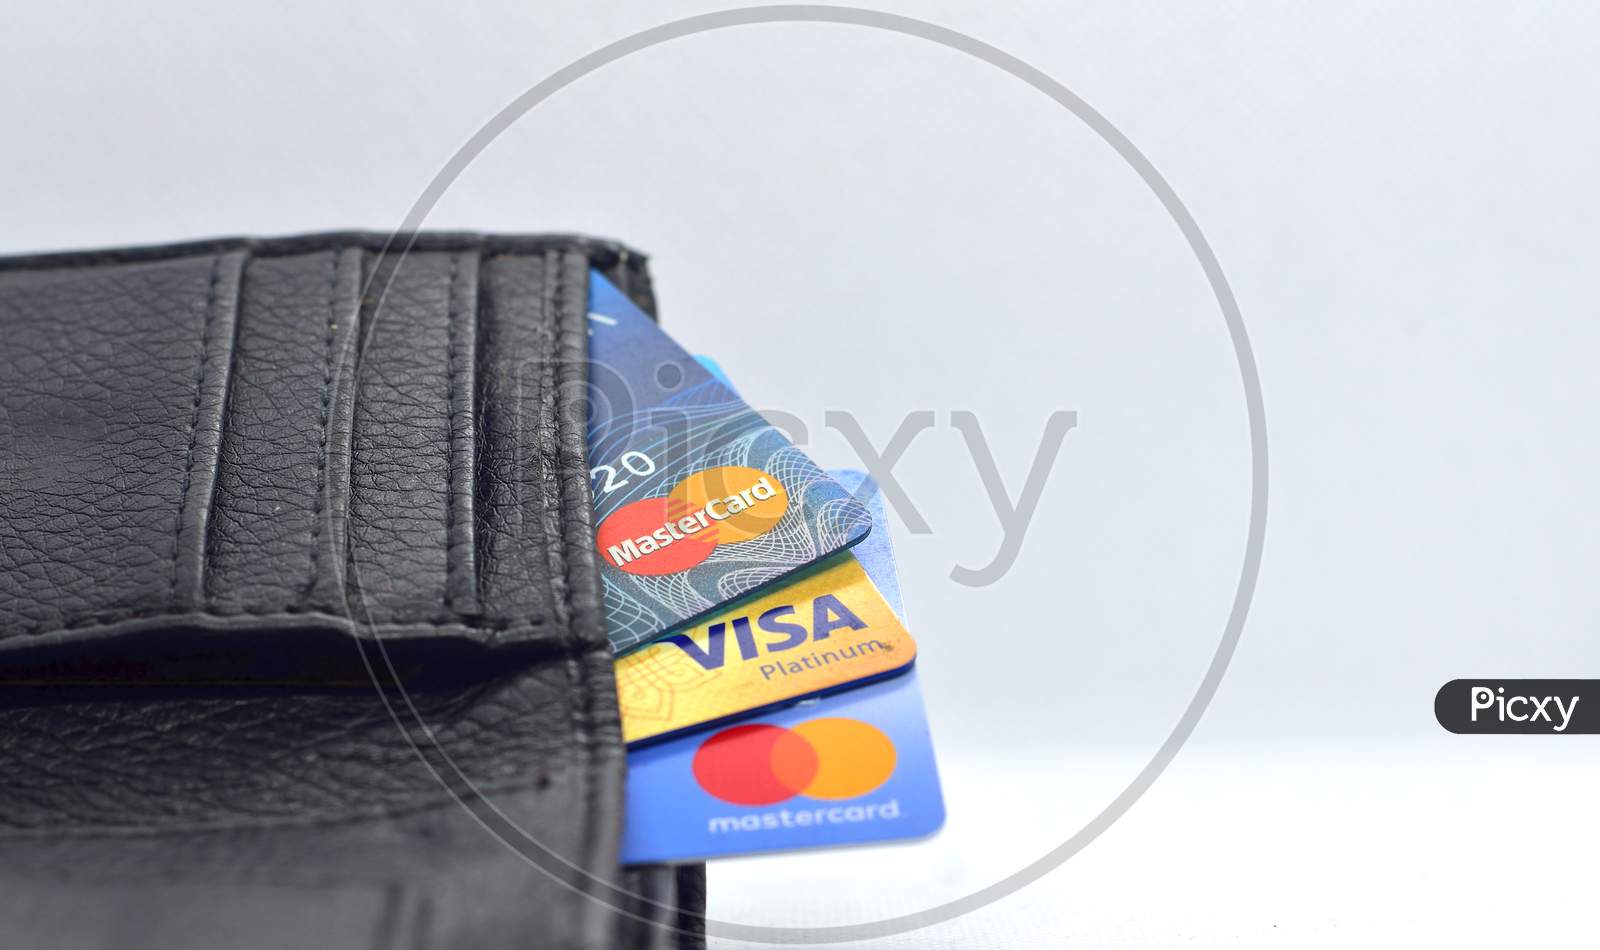 Debit And Credit Cards In Wallet On White Background. Side View